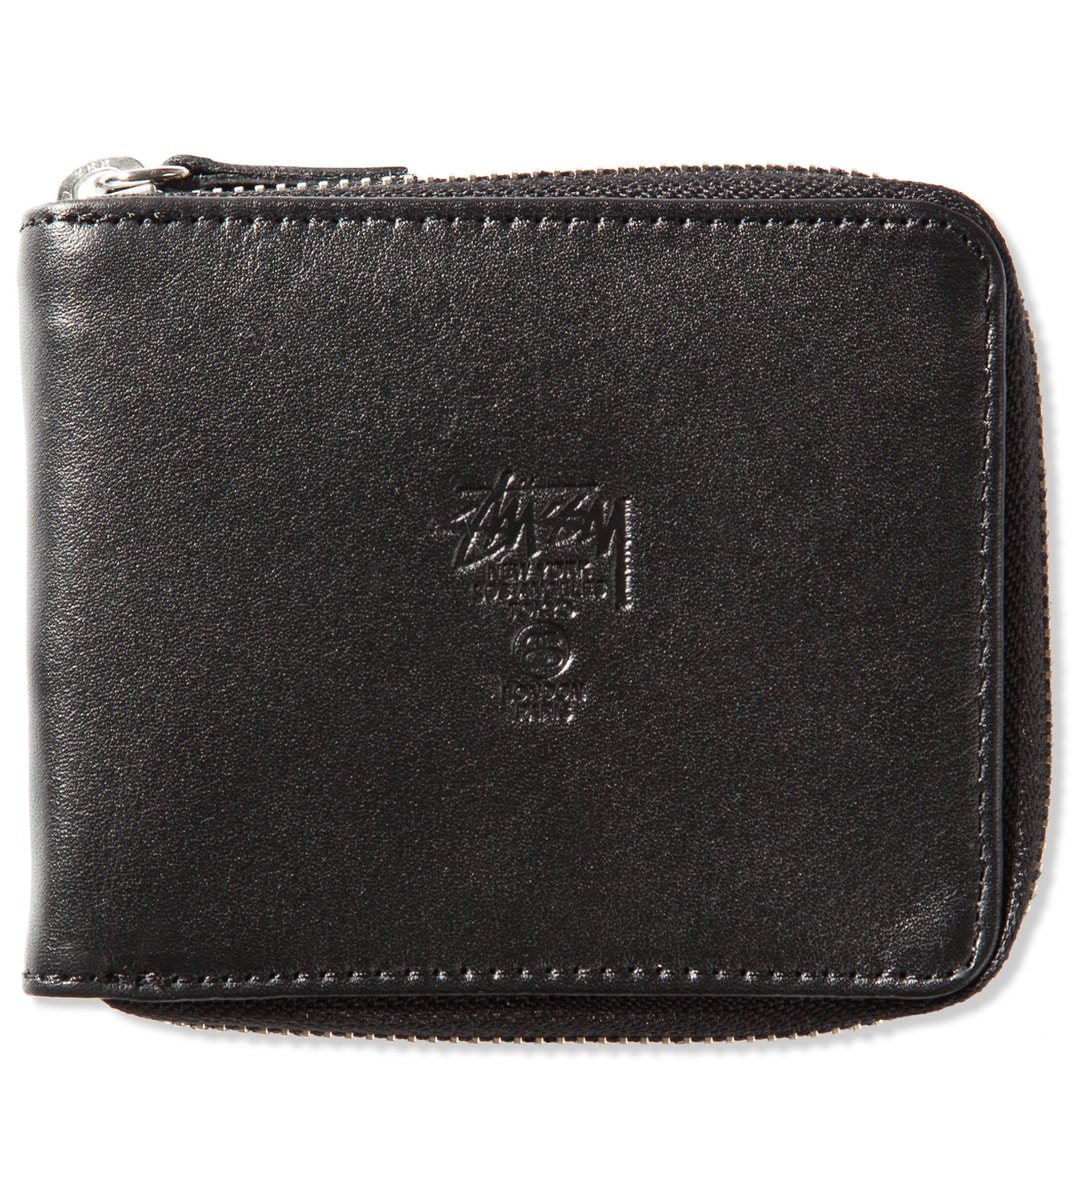 Stüssy - Black Classic Zip Wallet | HBX - Globally Curated Fashion and ...